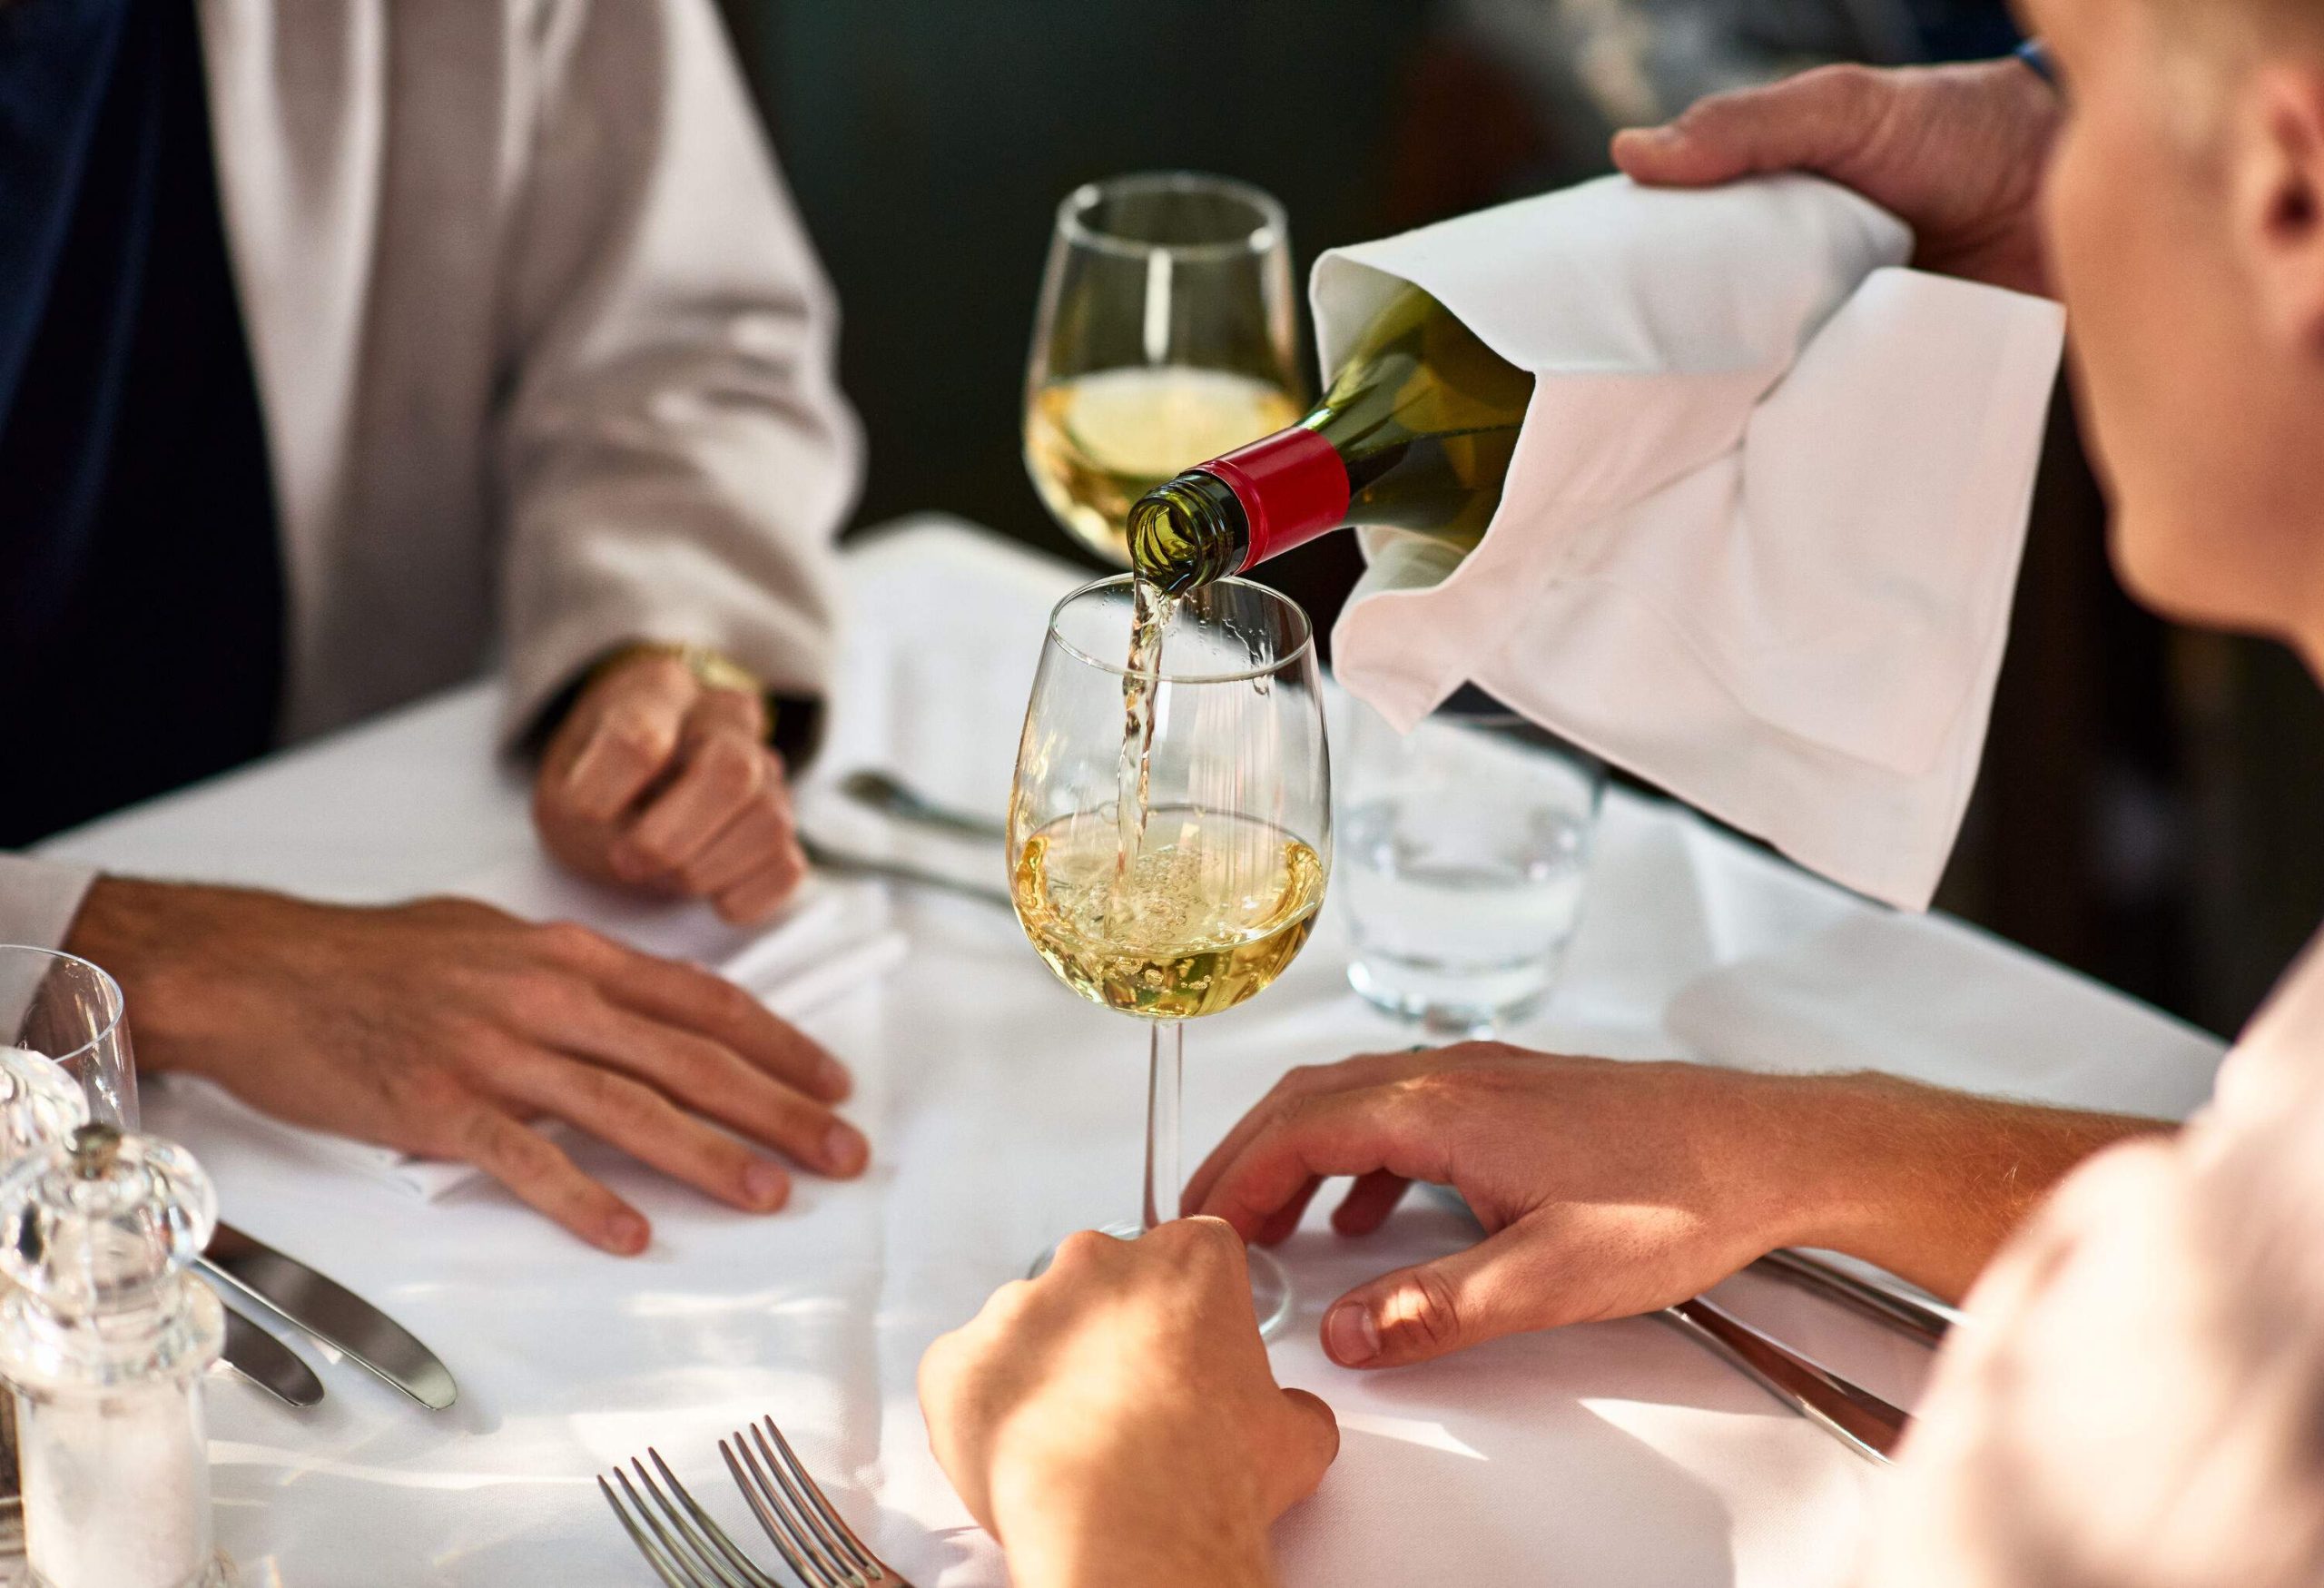 A person pours white wine for waiting customers, their hands resting on the table.